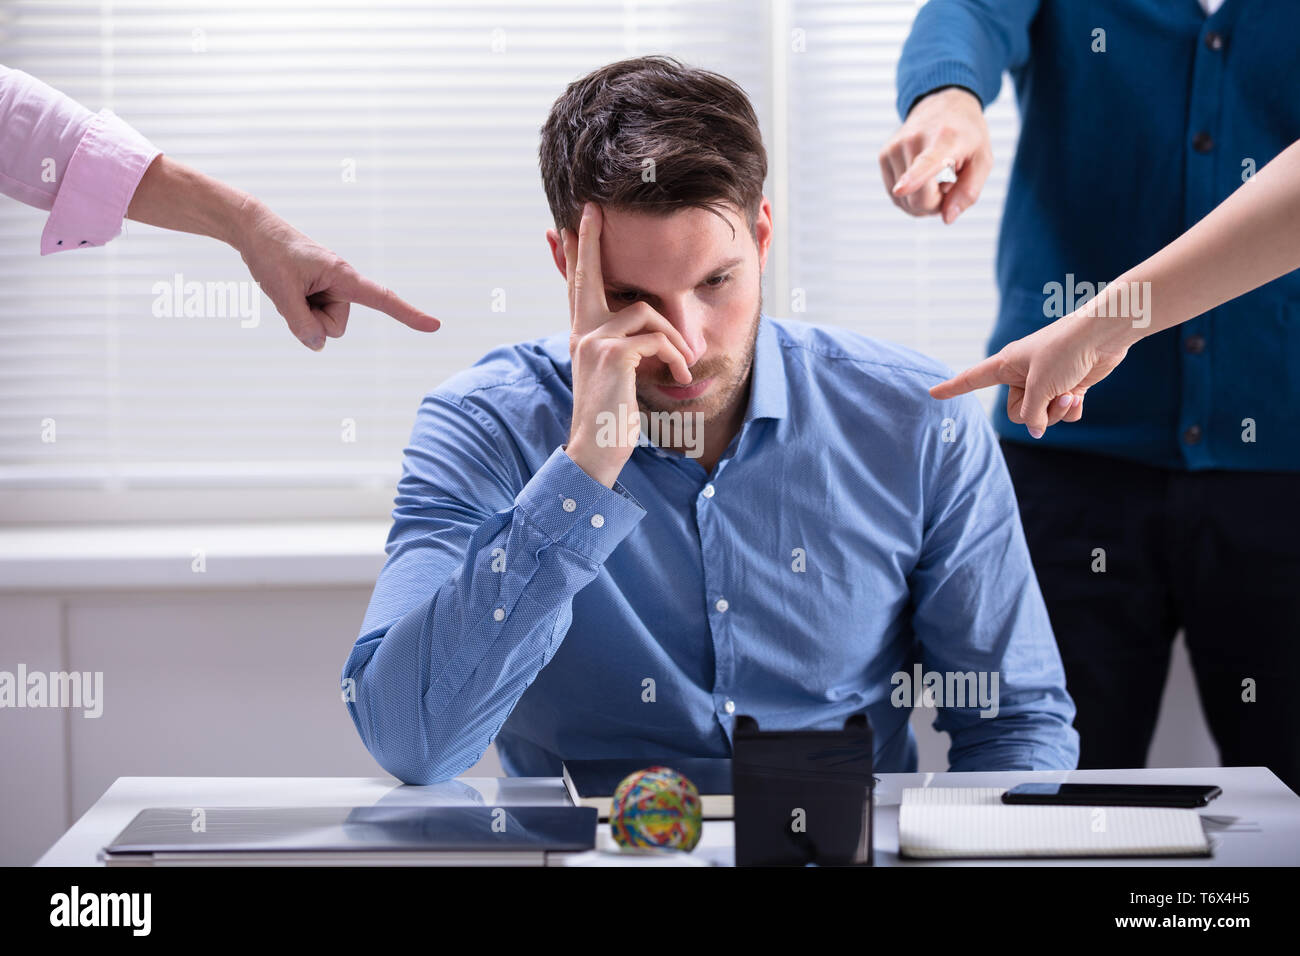 Many Hands Pointing The Stress Businessman At The Workplace Stock Photo